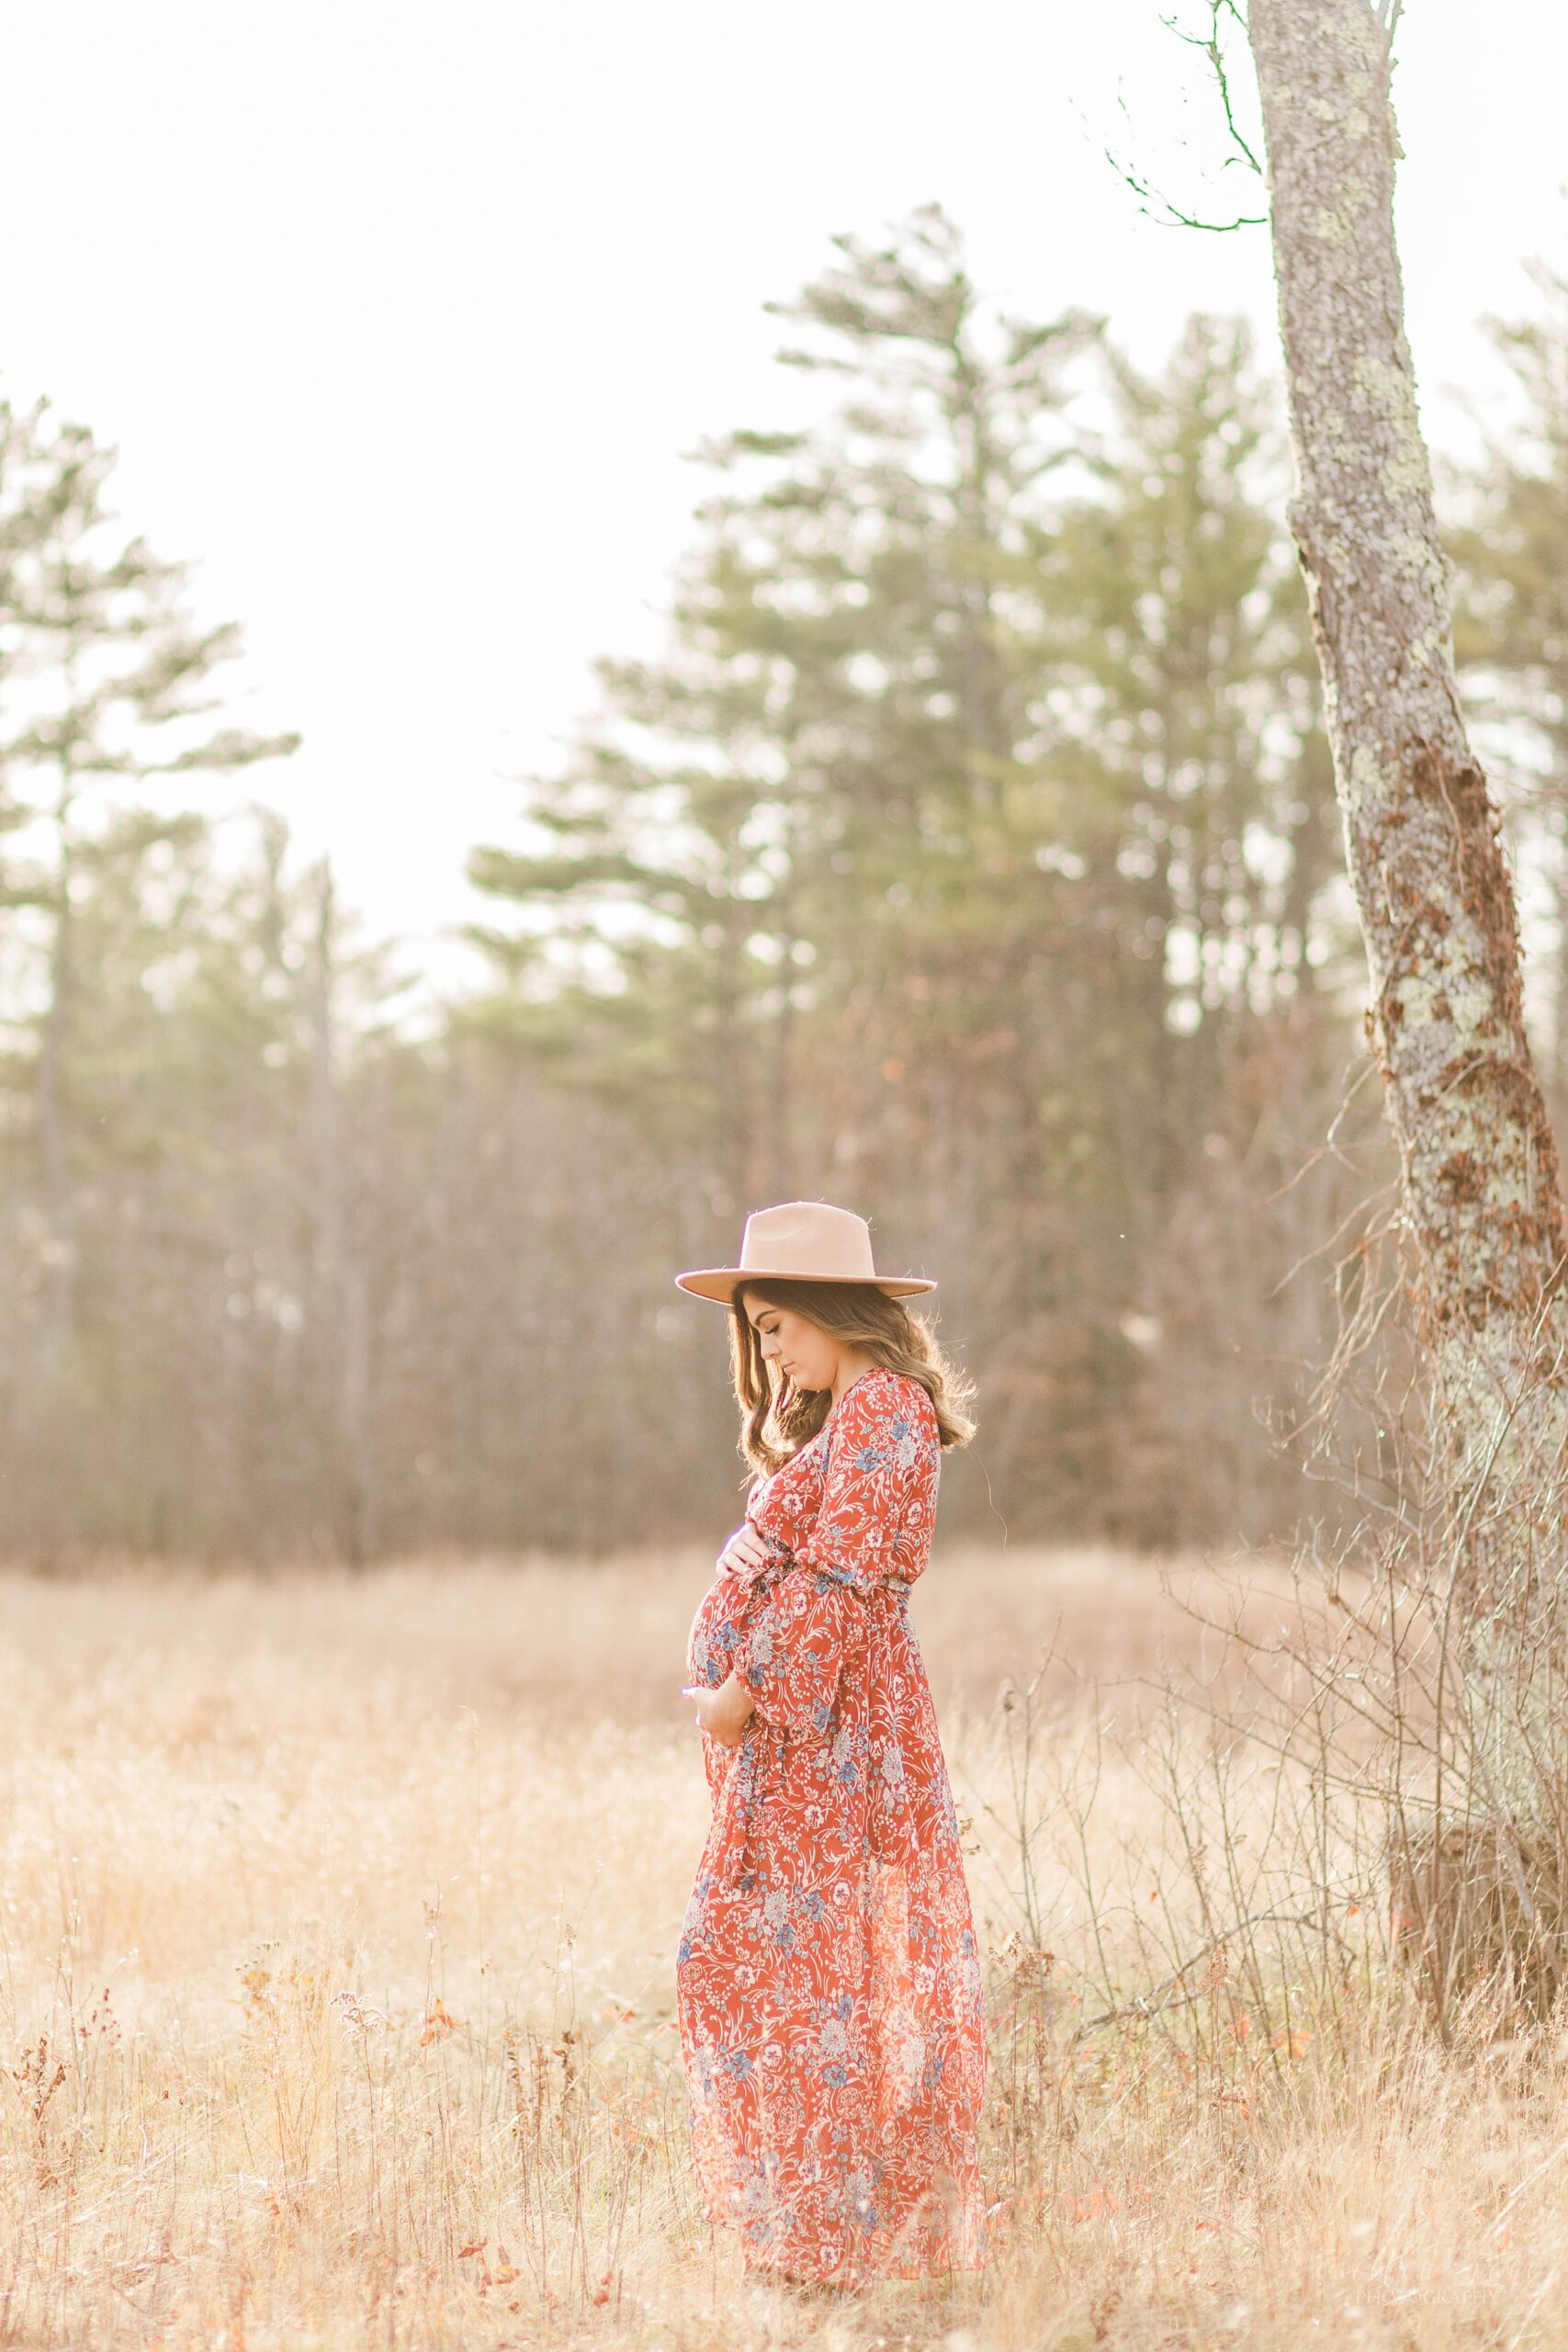 Pregnant woman in a hat standing in a field